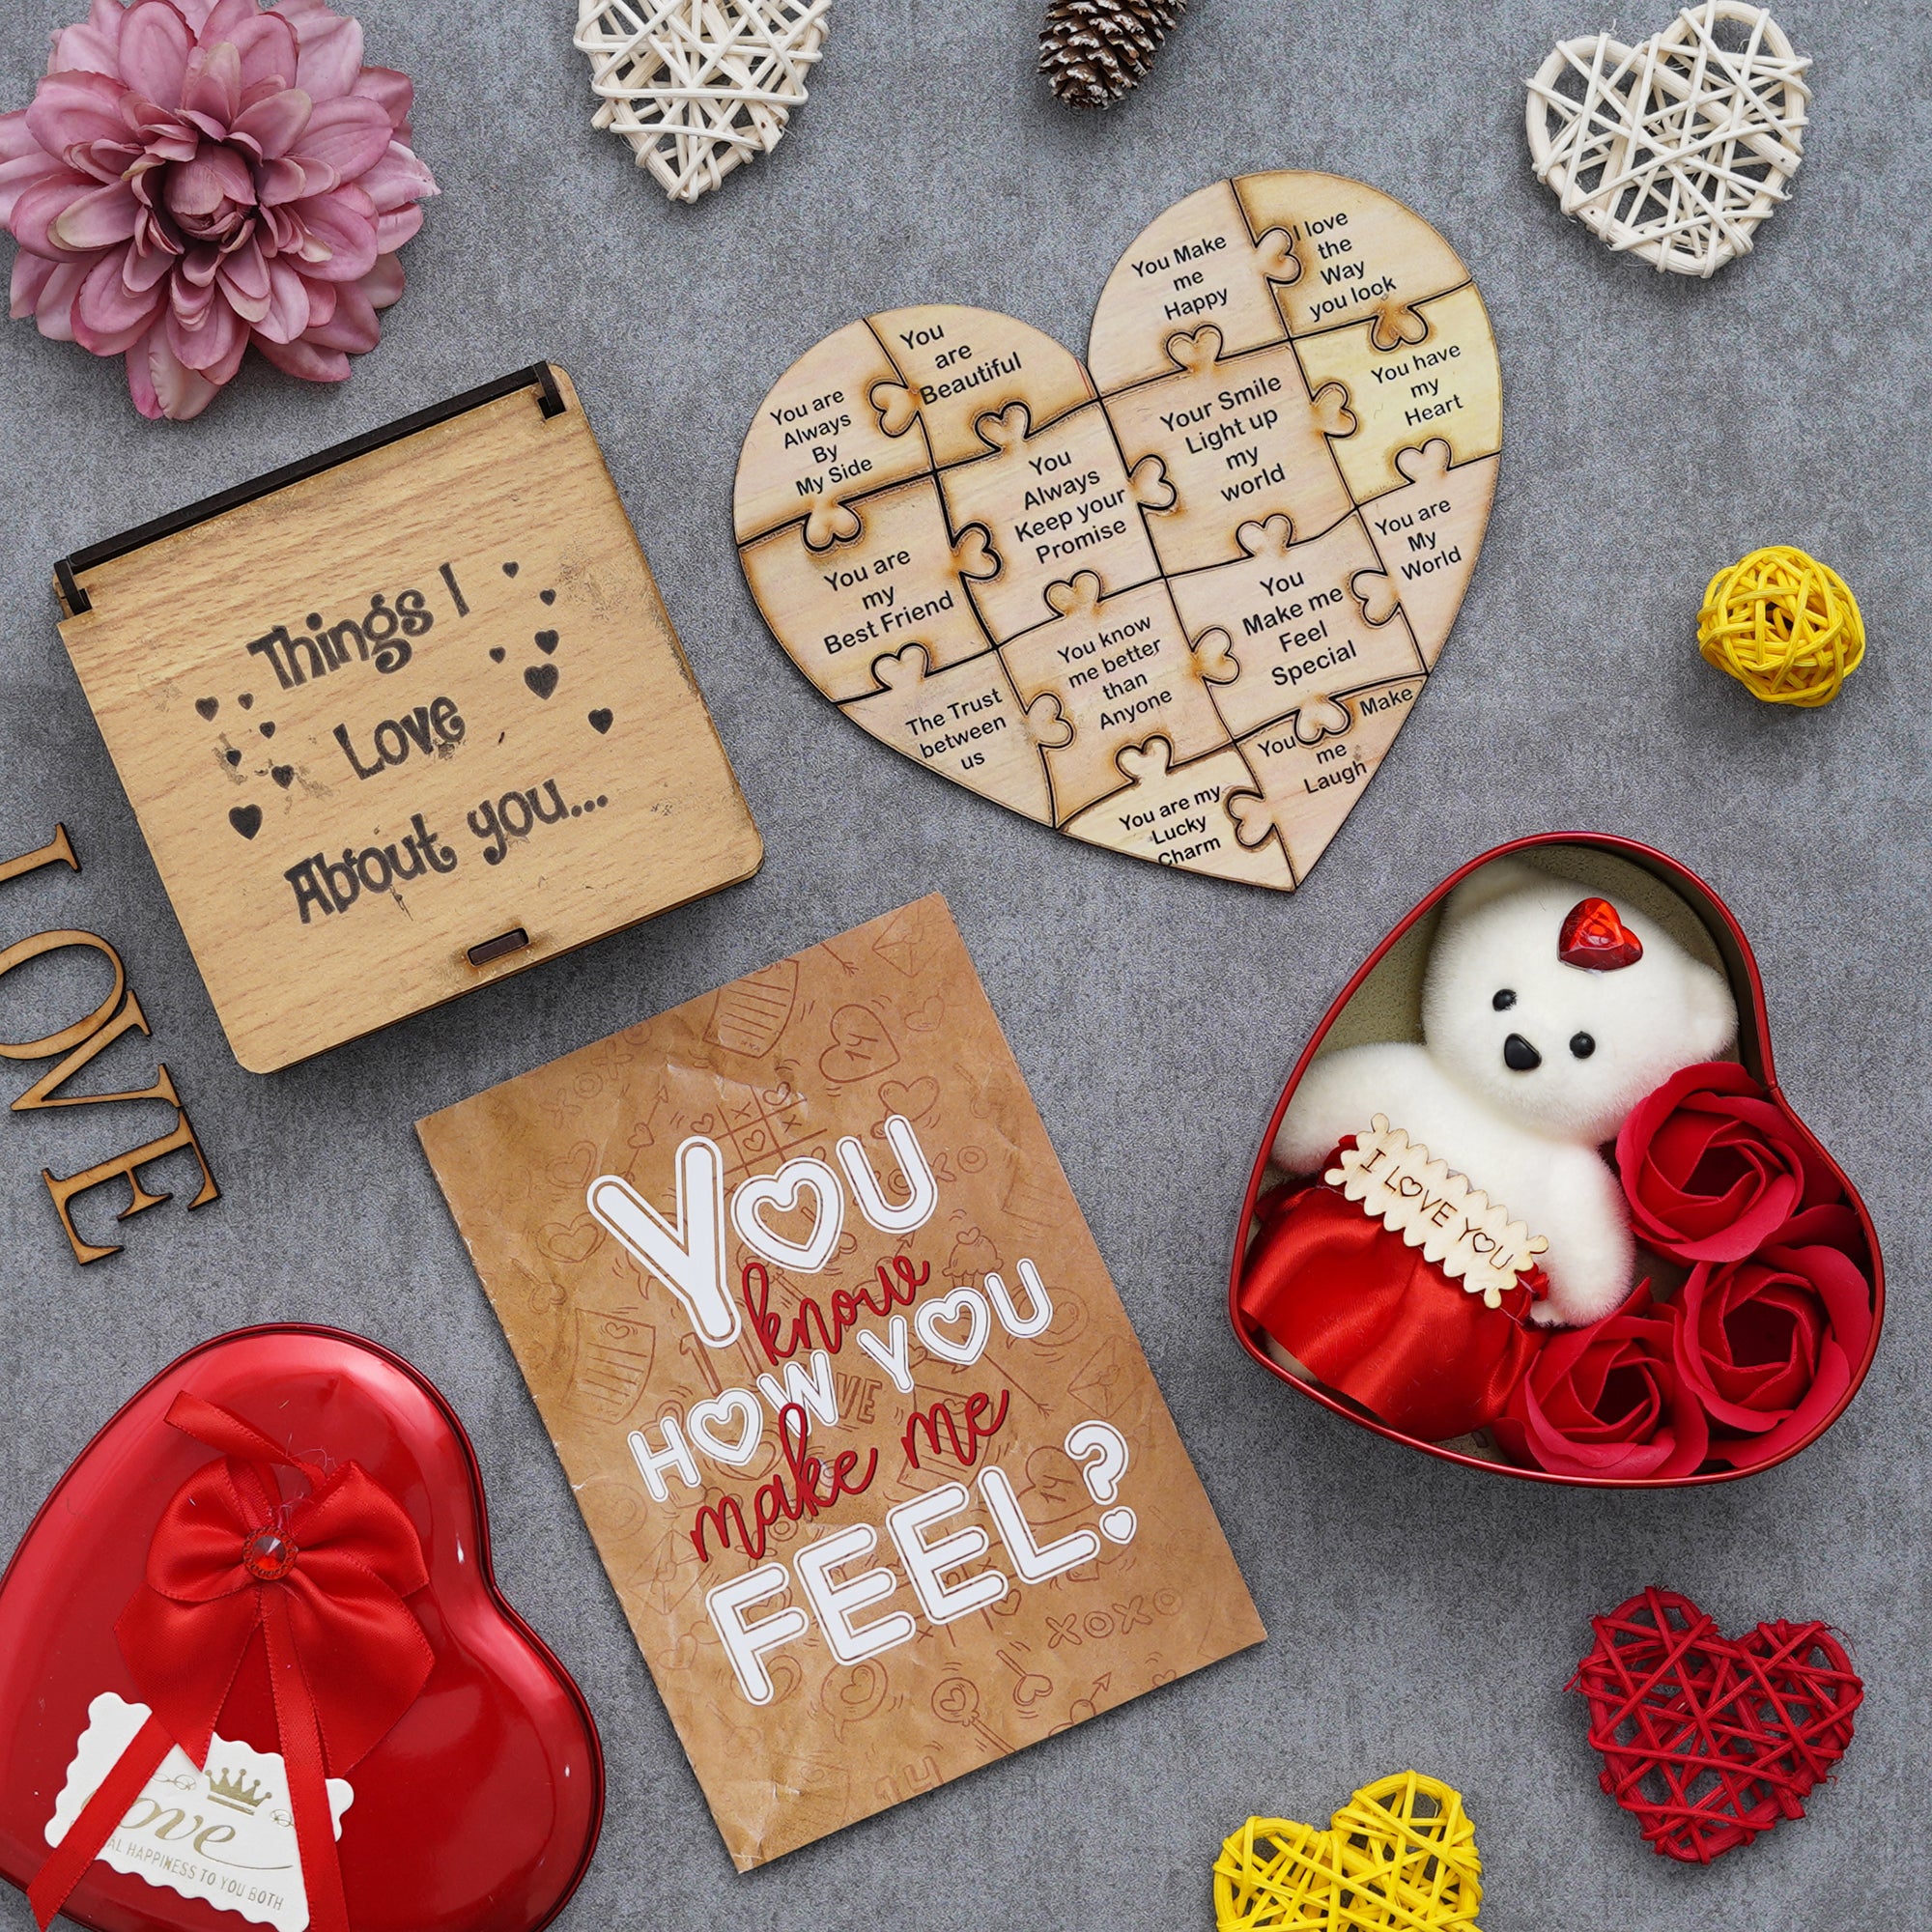 Valentine Combo of Card, Heart Shaped Gift Box Set with White Teddy and Red Roses, "Things I Love About You" Puzzle Wooden Gift Set